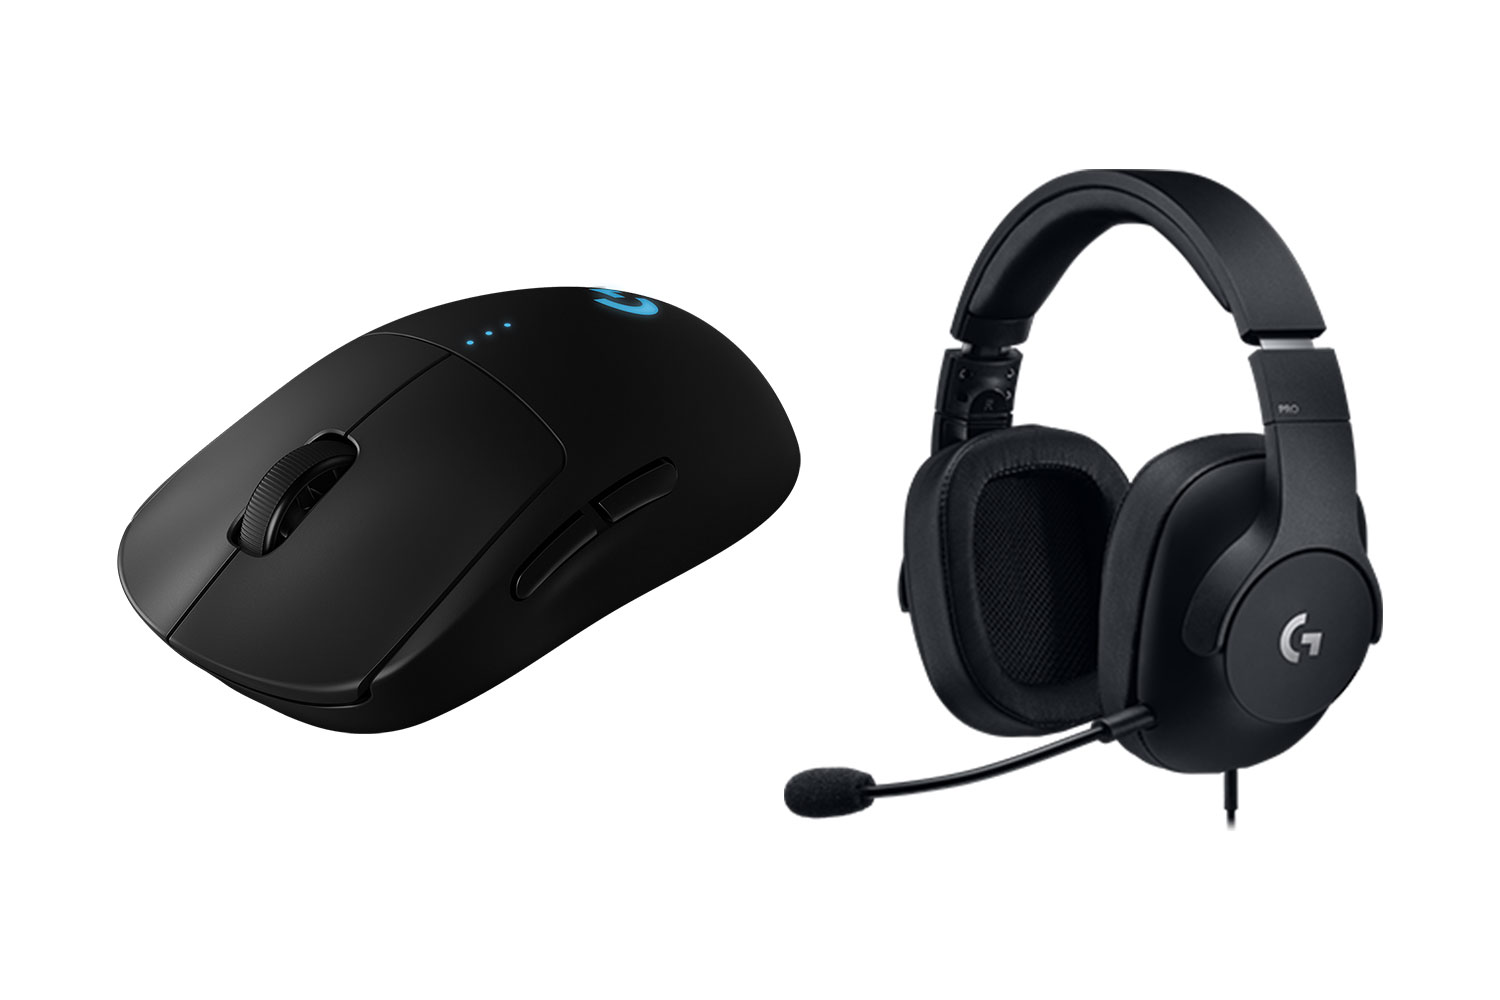 Logitech G PRO Wireless Gaming Mouse and Gaming Headset